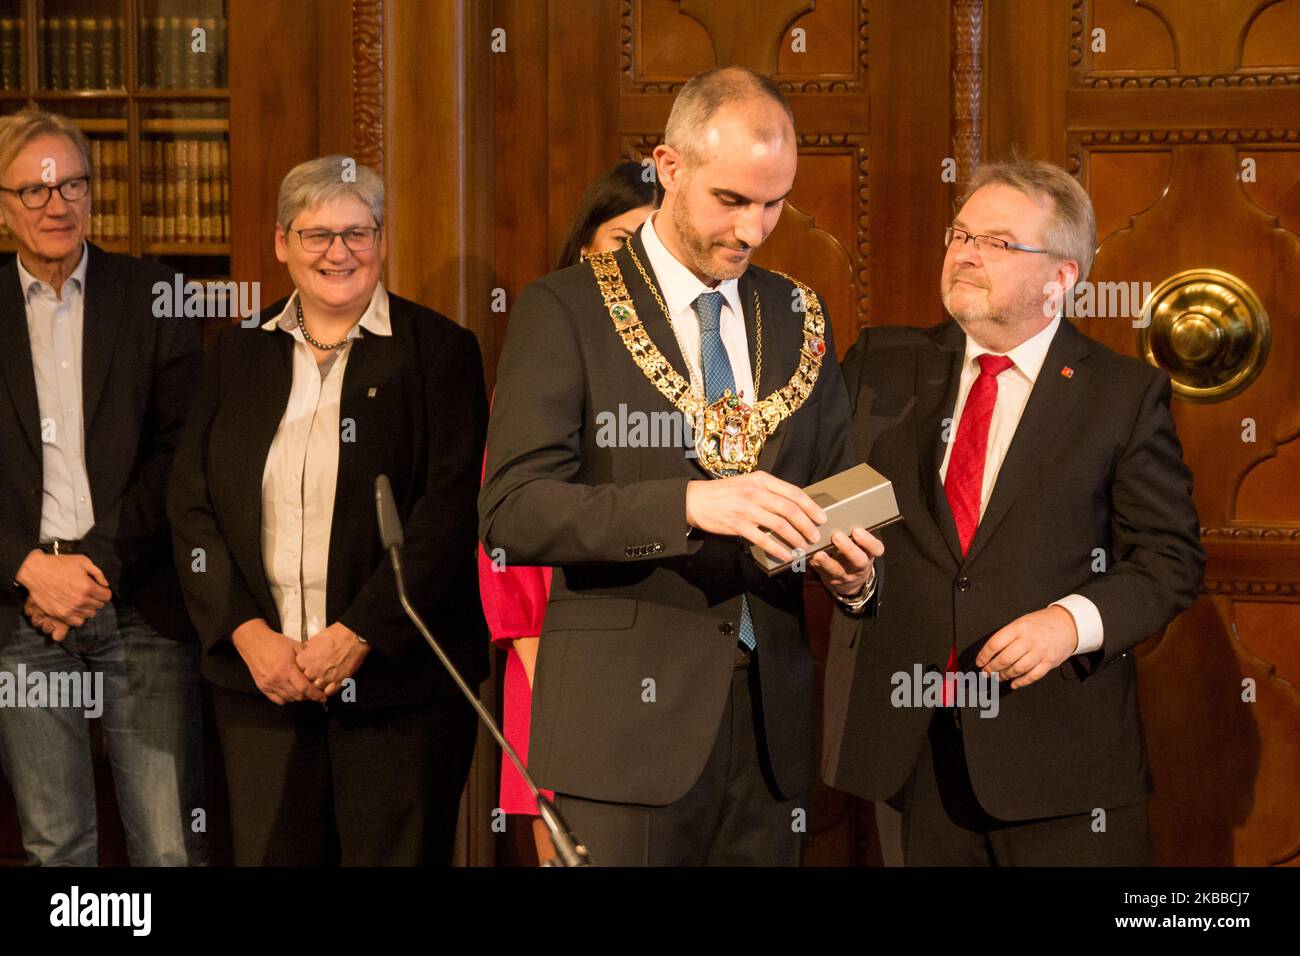 On the morning of 22 November 2019, the new Lord Mayor of Hanover, Belit Onay (Alliance 90/The Greens), was introduced in the Town Hall. In a ceremonial event the mayor, Thomas Herrmann, presented the golden chain of office to the new mayor. Belit Onay prevailed against the non-party candidate of the Christian Democratic Union, Eckhard Scholz, in the run-off election on 10 November 2019 with 52.90 percent. It is the fourth Green mayor in Germany and the first in Hanover. (Photo by Peter Niedung/NurPhoto) Stock Photo